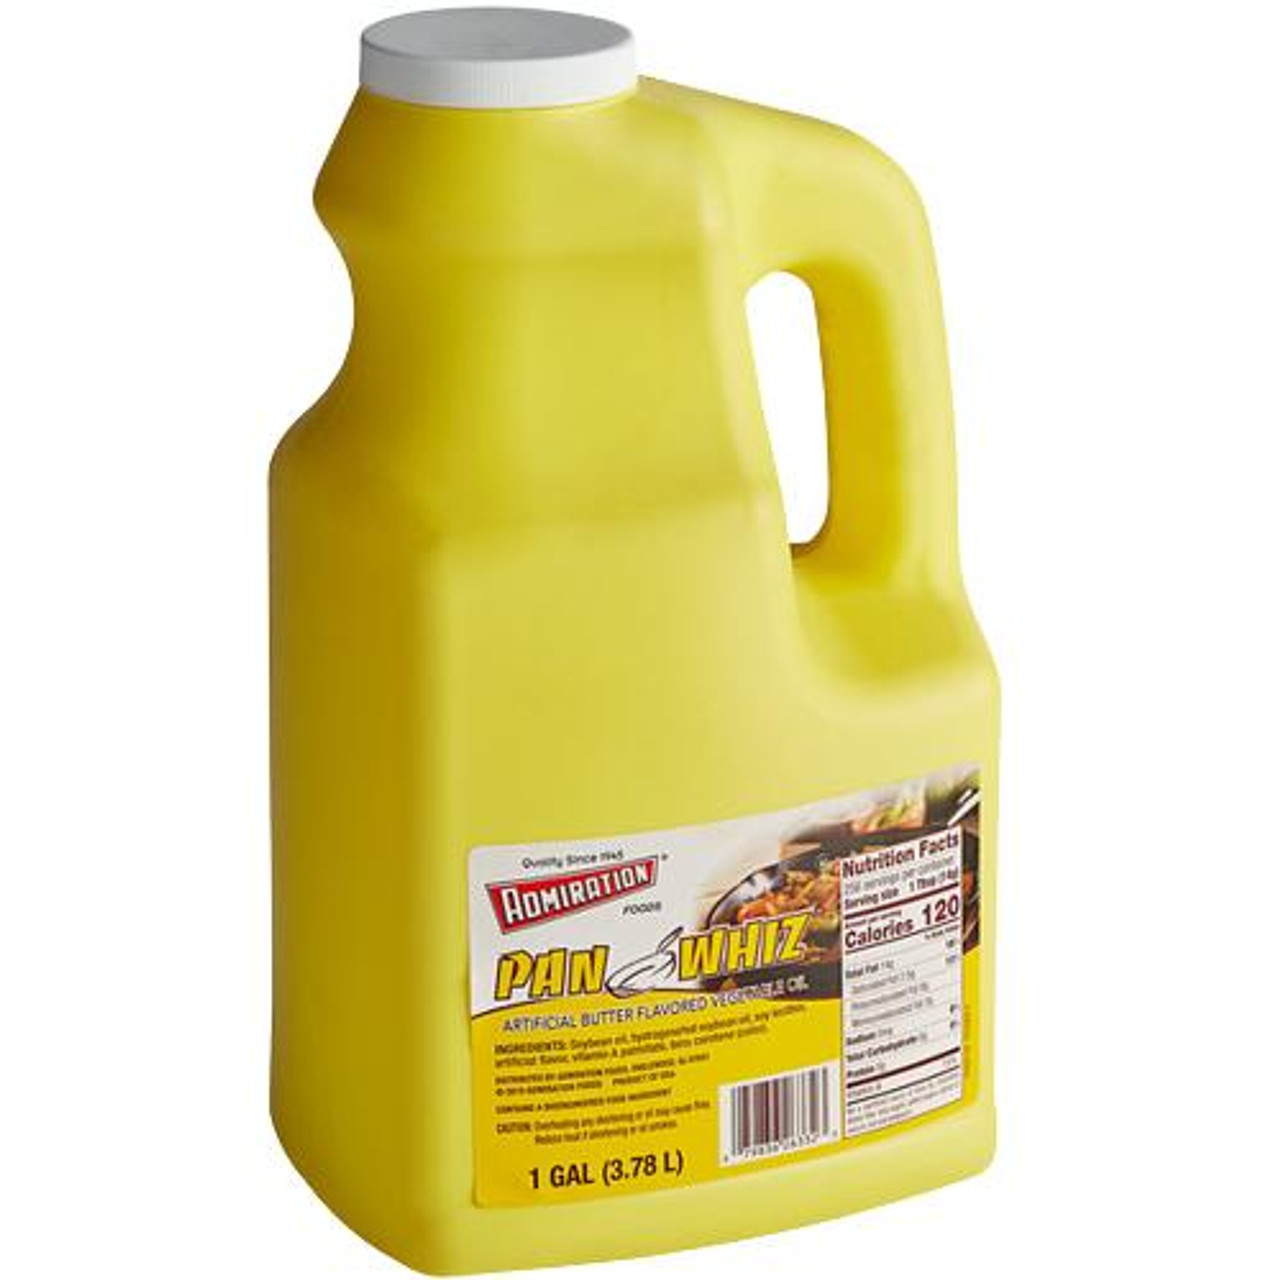 https://cdn11.bigcommerce.com/s-g5ygv2at8j/images/stencil/1280x1280/products/14824/27935/pan-and-grill-pan-and-grill-oil-liquid-butter-alternative-1-gallon-or-7.53-lbs-or-4case__02775.1687048064.jpg?c=1